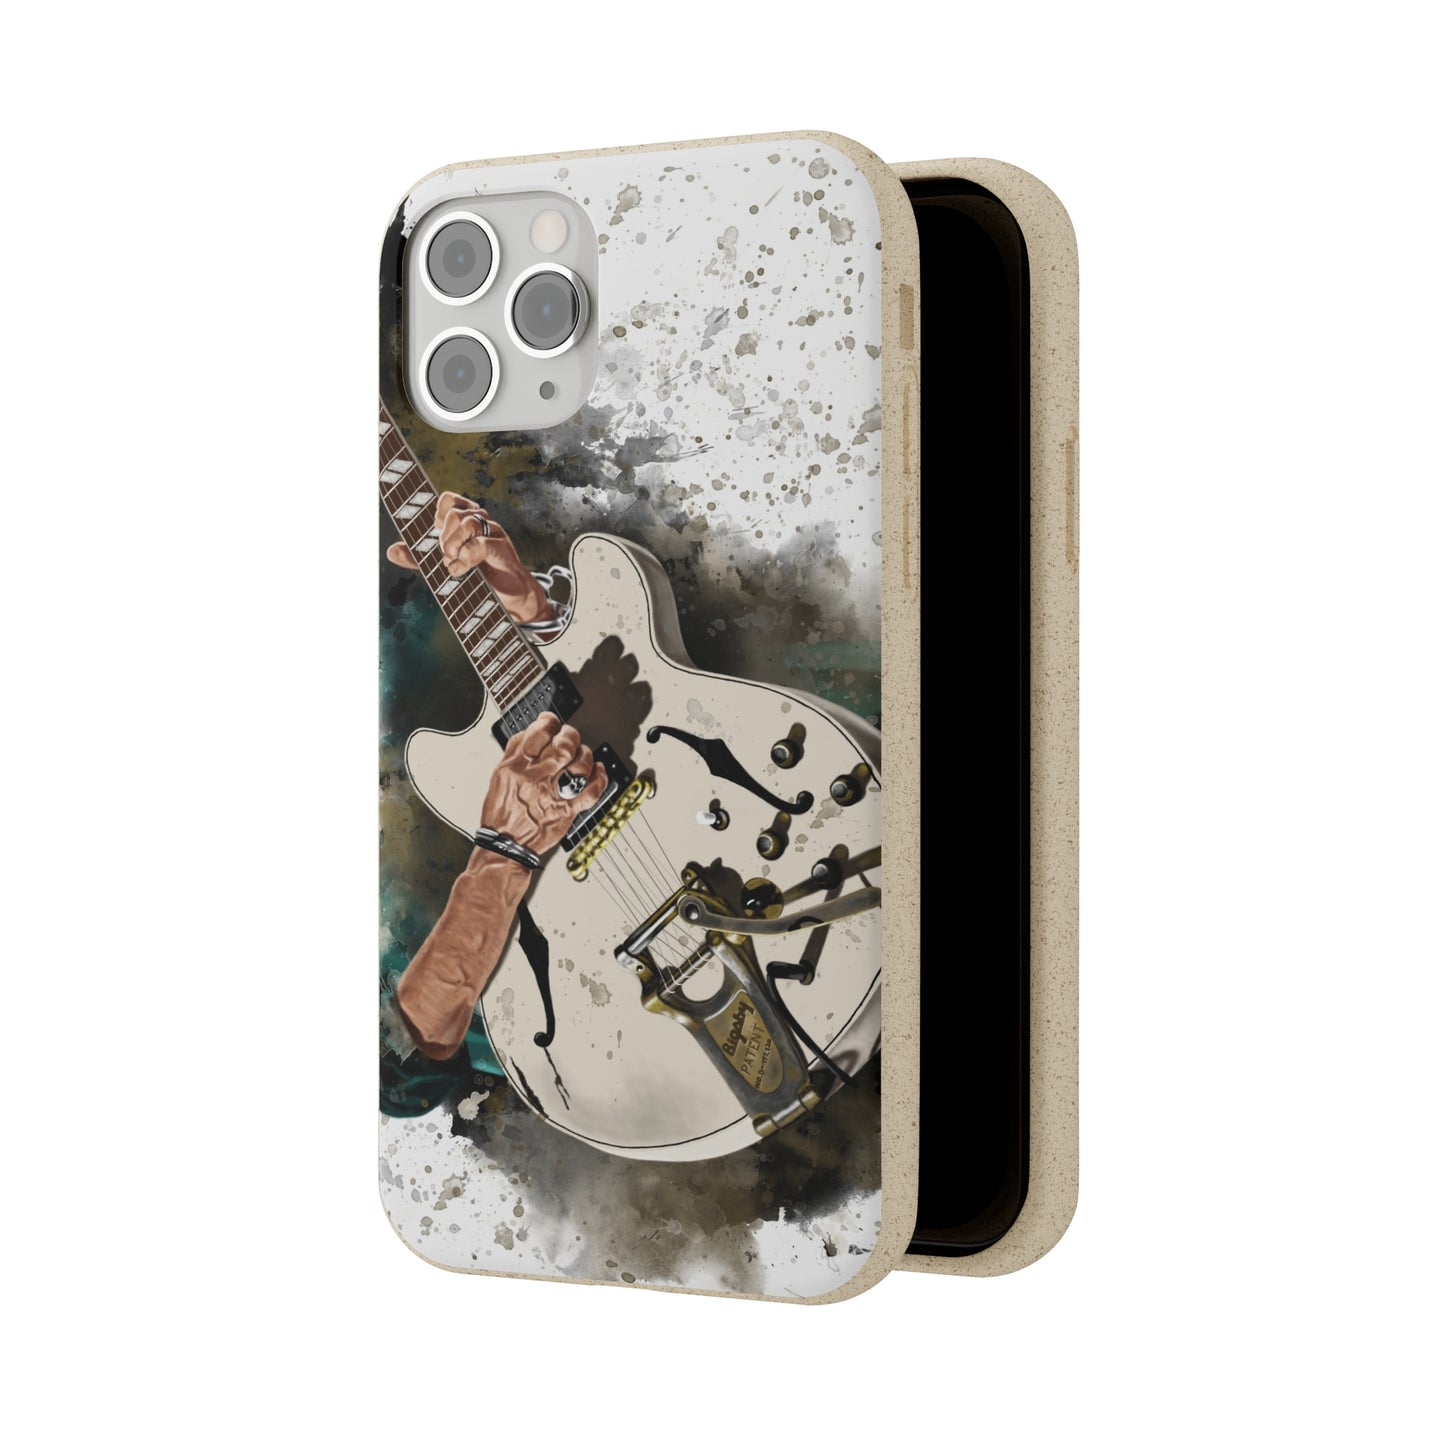 Digital painting of Pirate's electric guitar printed on biodegradable iphone phone case